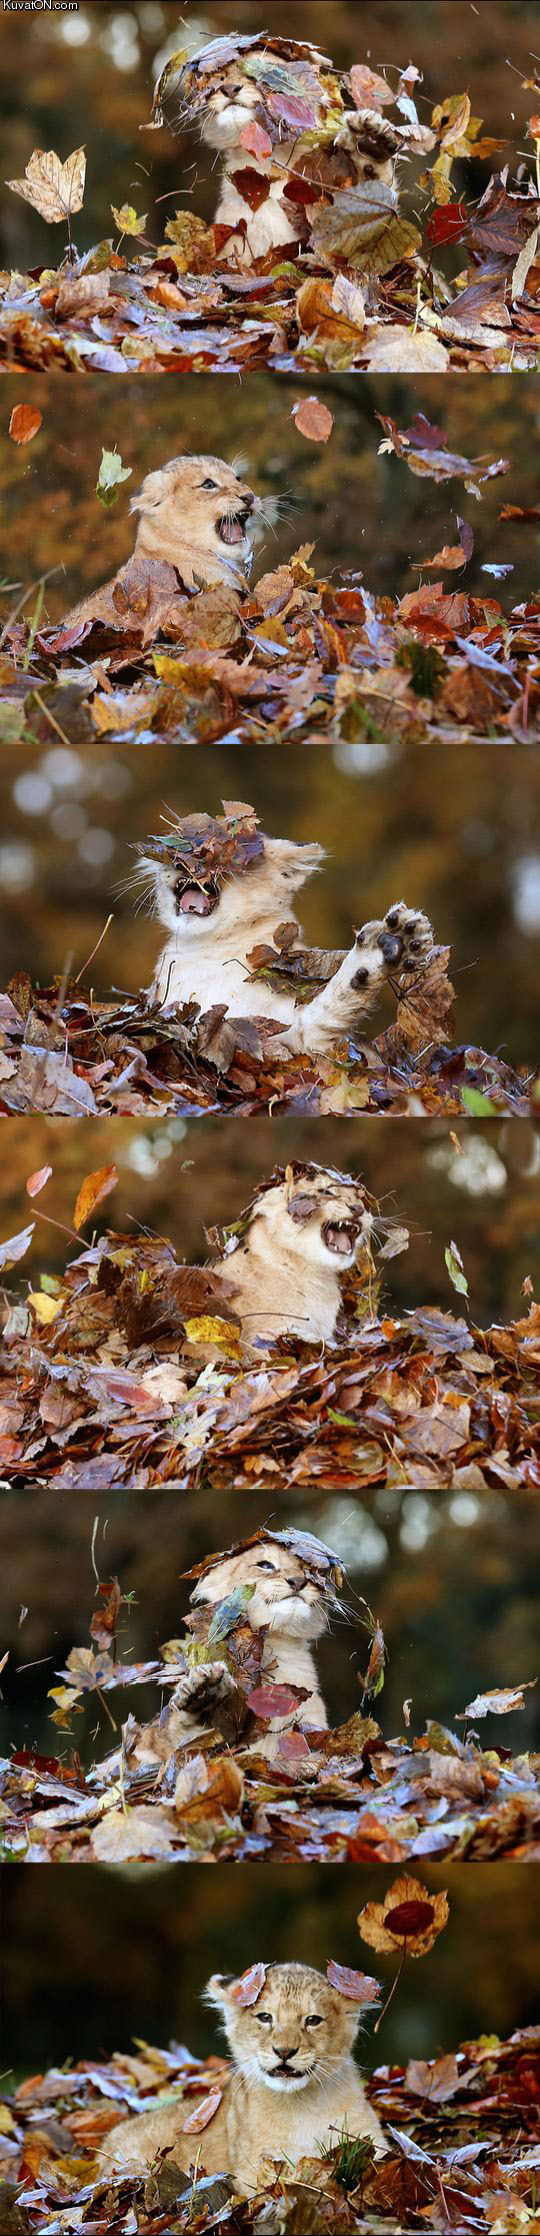 just_a_lion_cub_playing_in_the_leaves.jpg